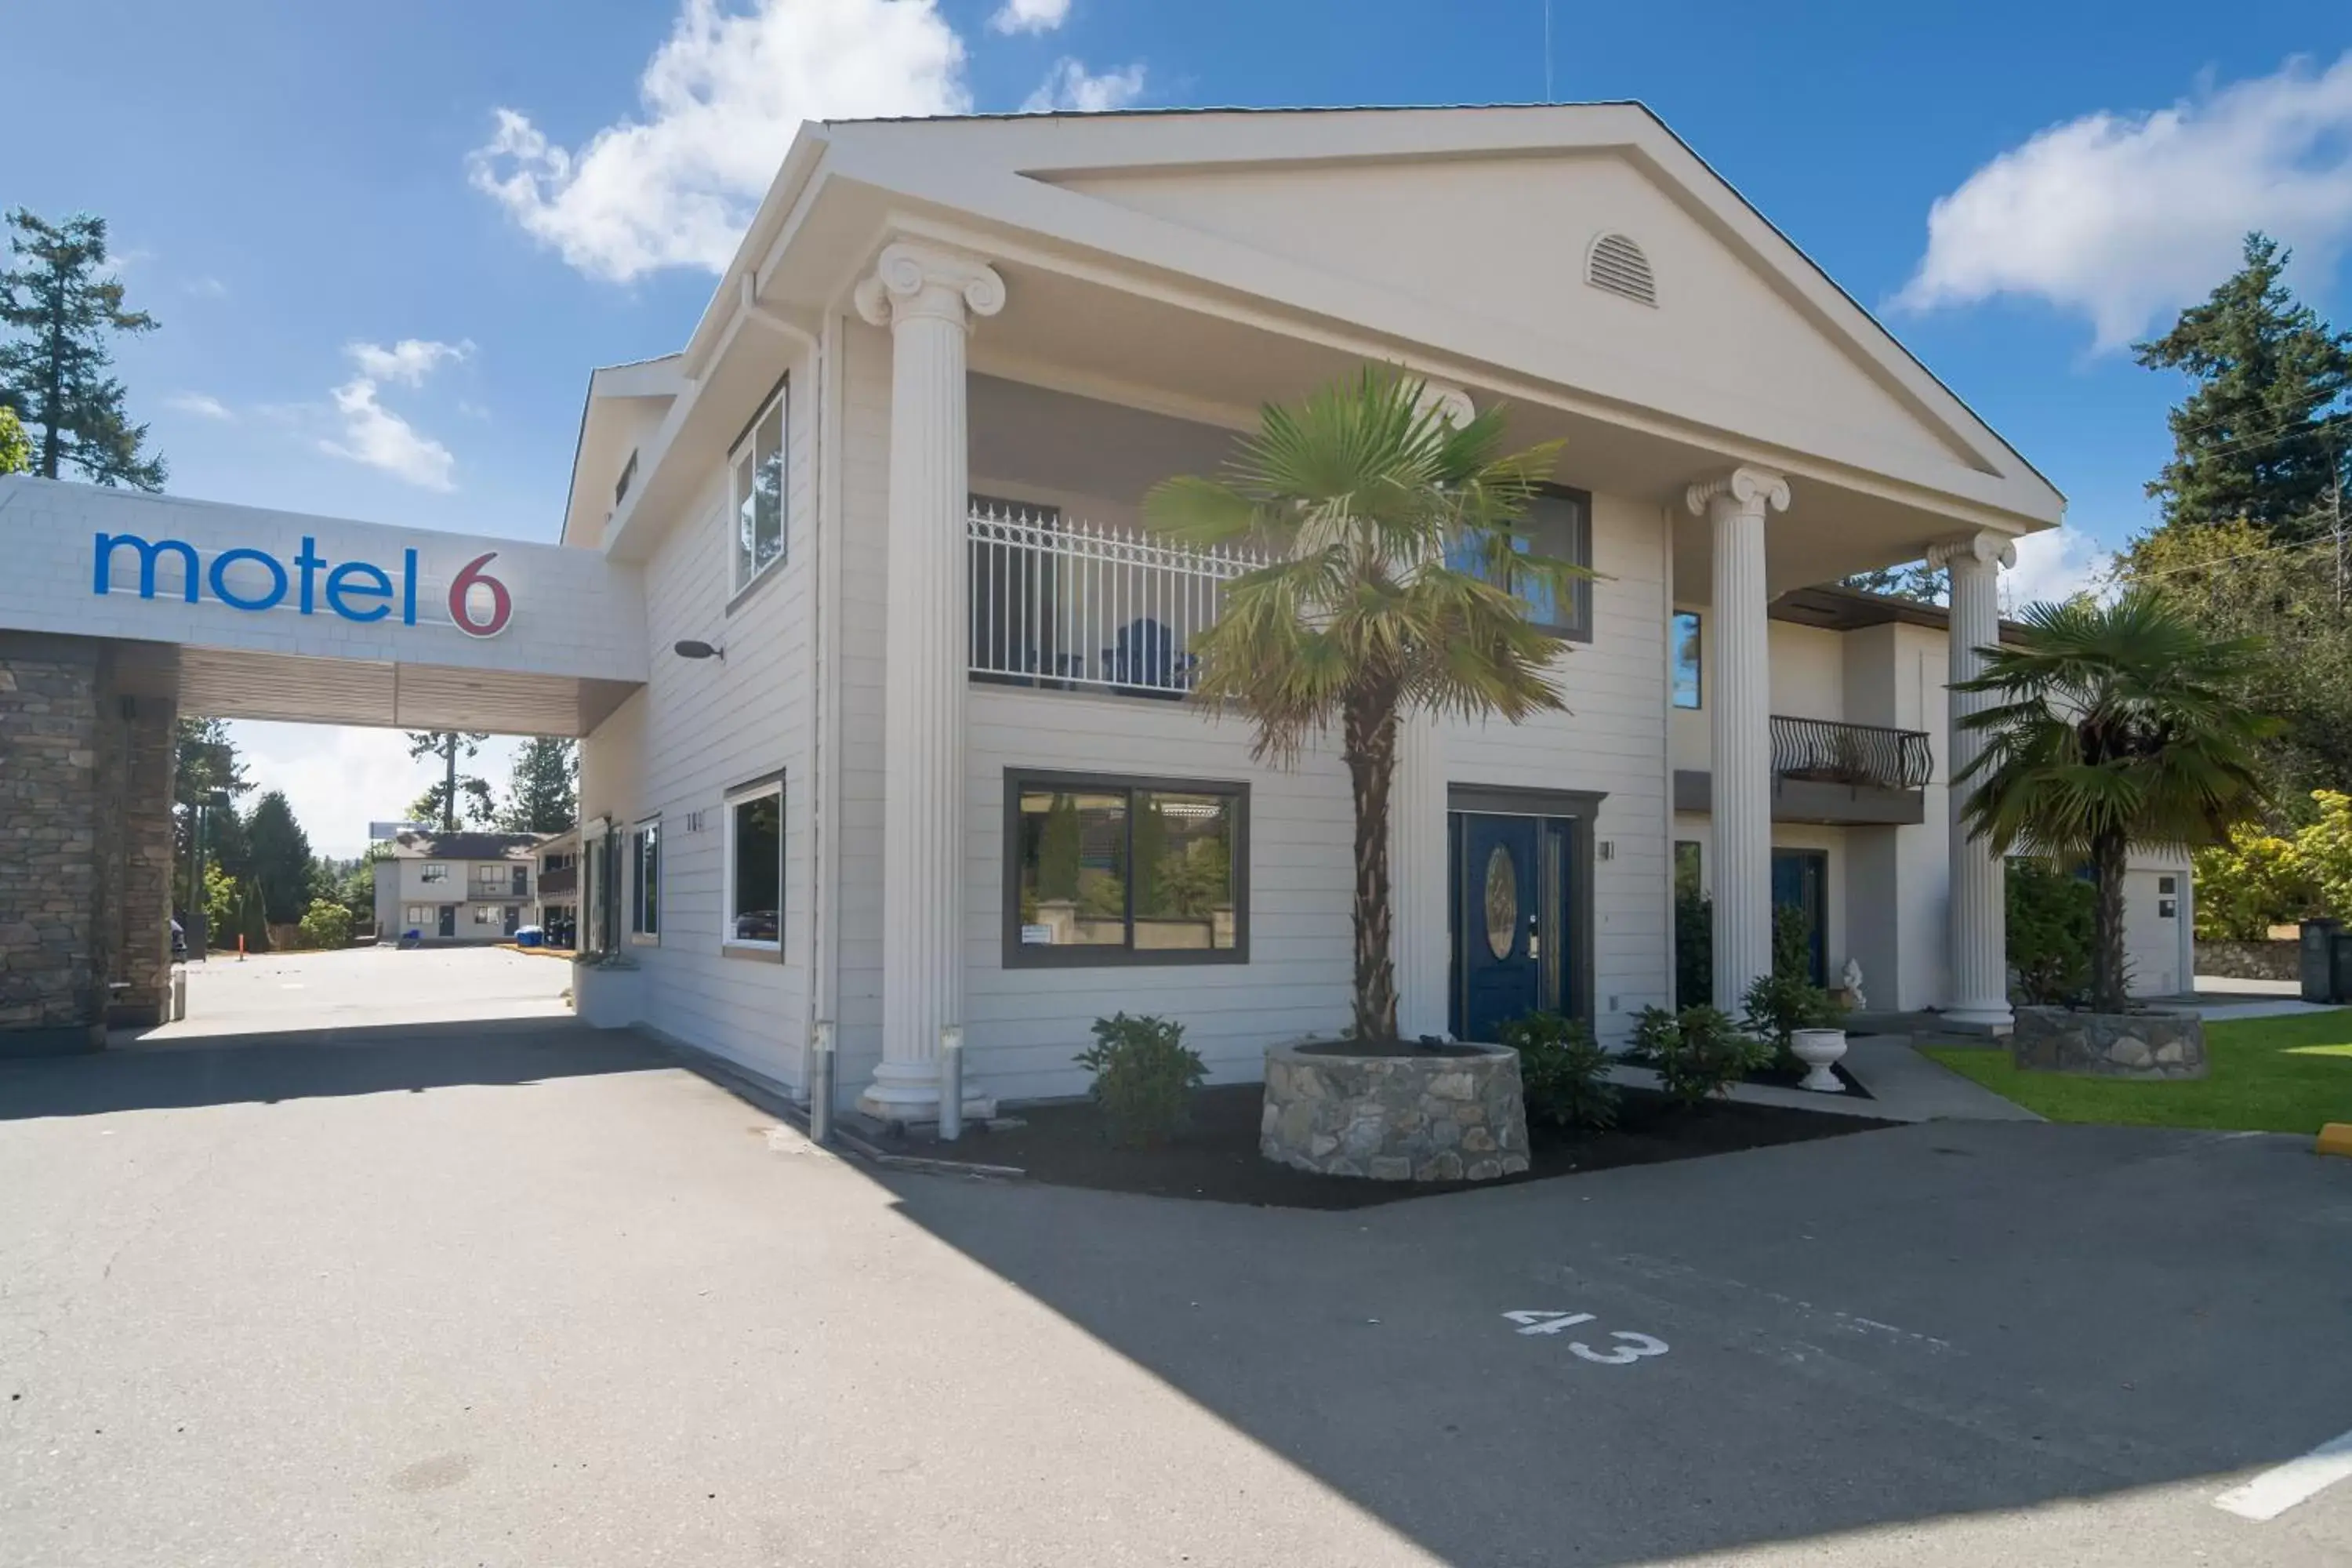 Property Building in Motel 6-Saanichton, BC - Victoria Airport